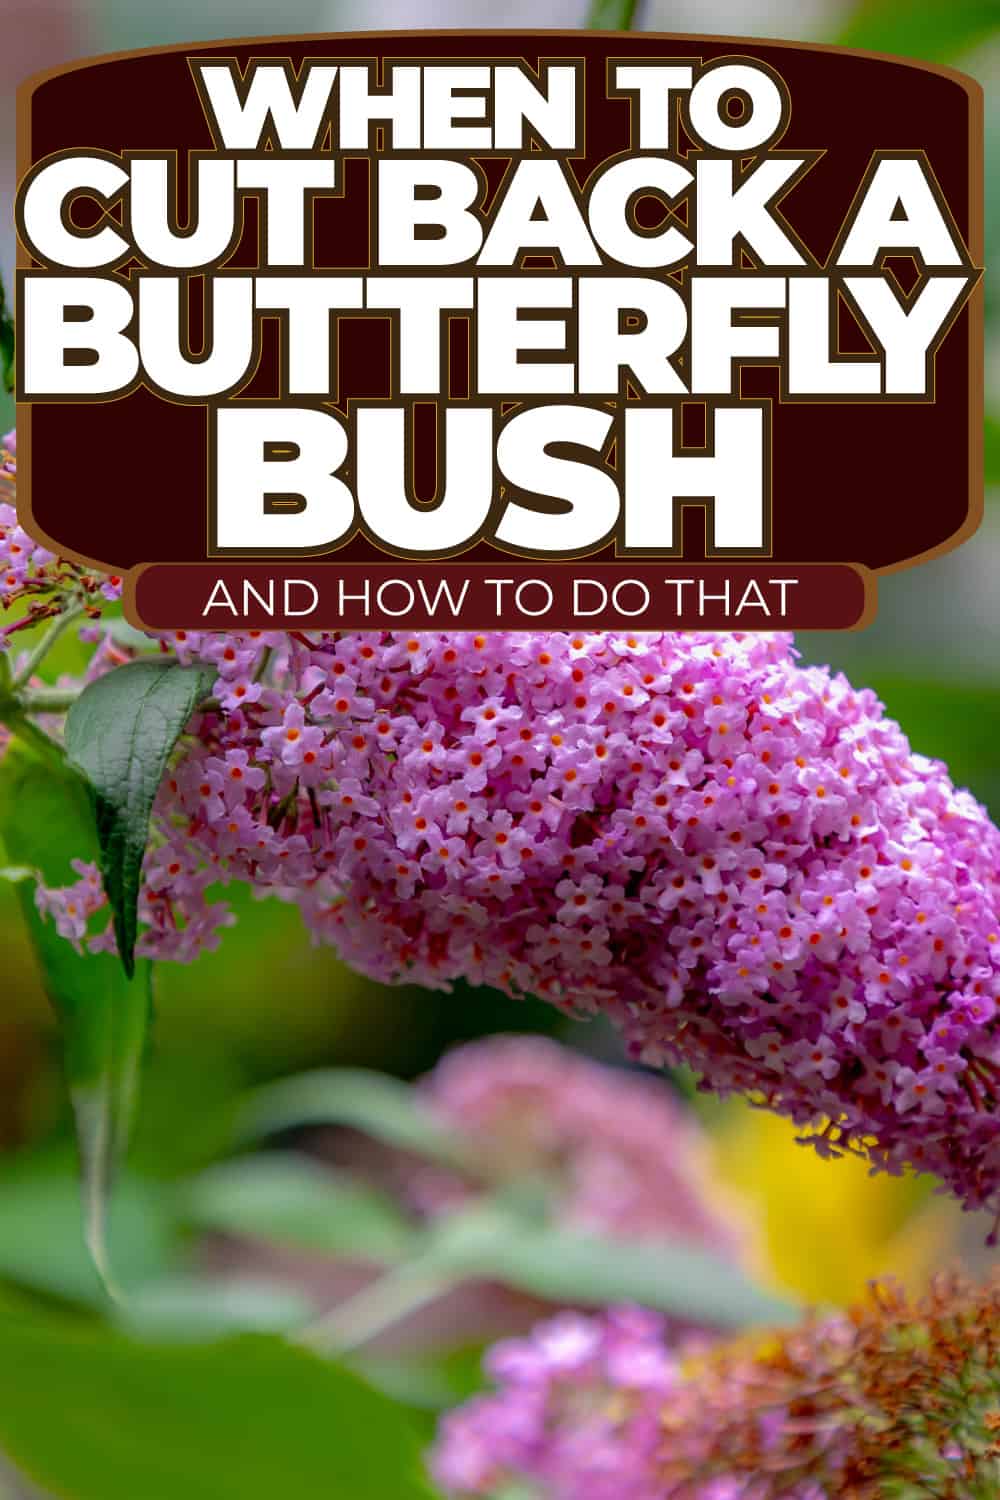 When To Cut Back A Butterfly Bush [And How To Do That]